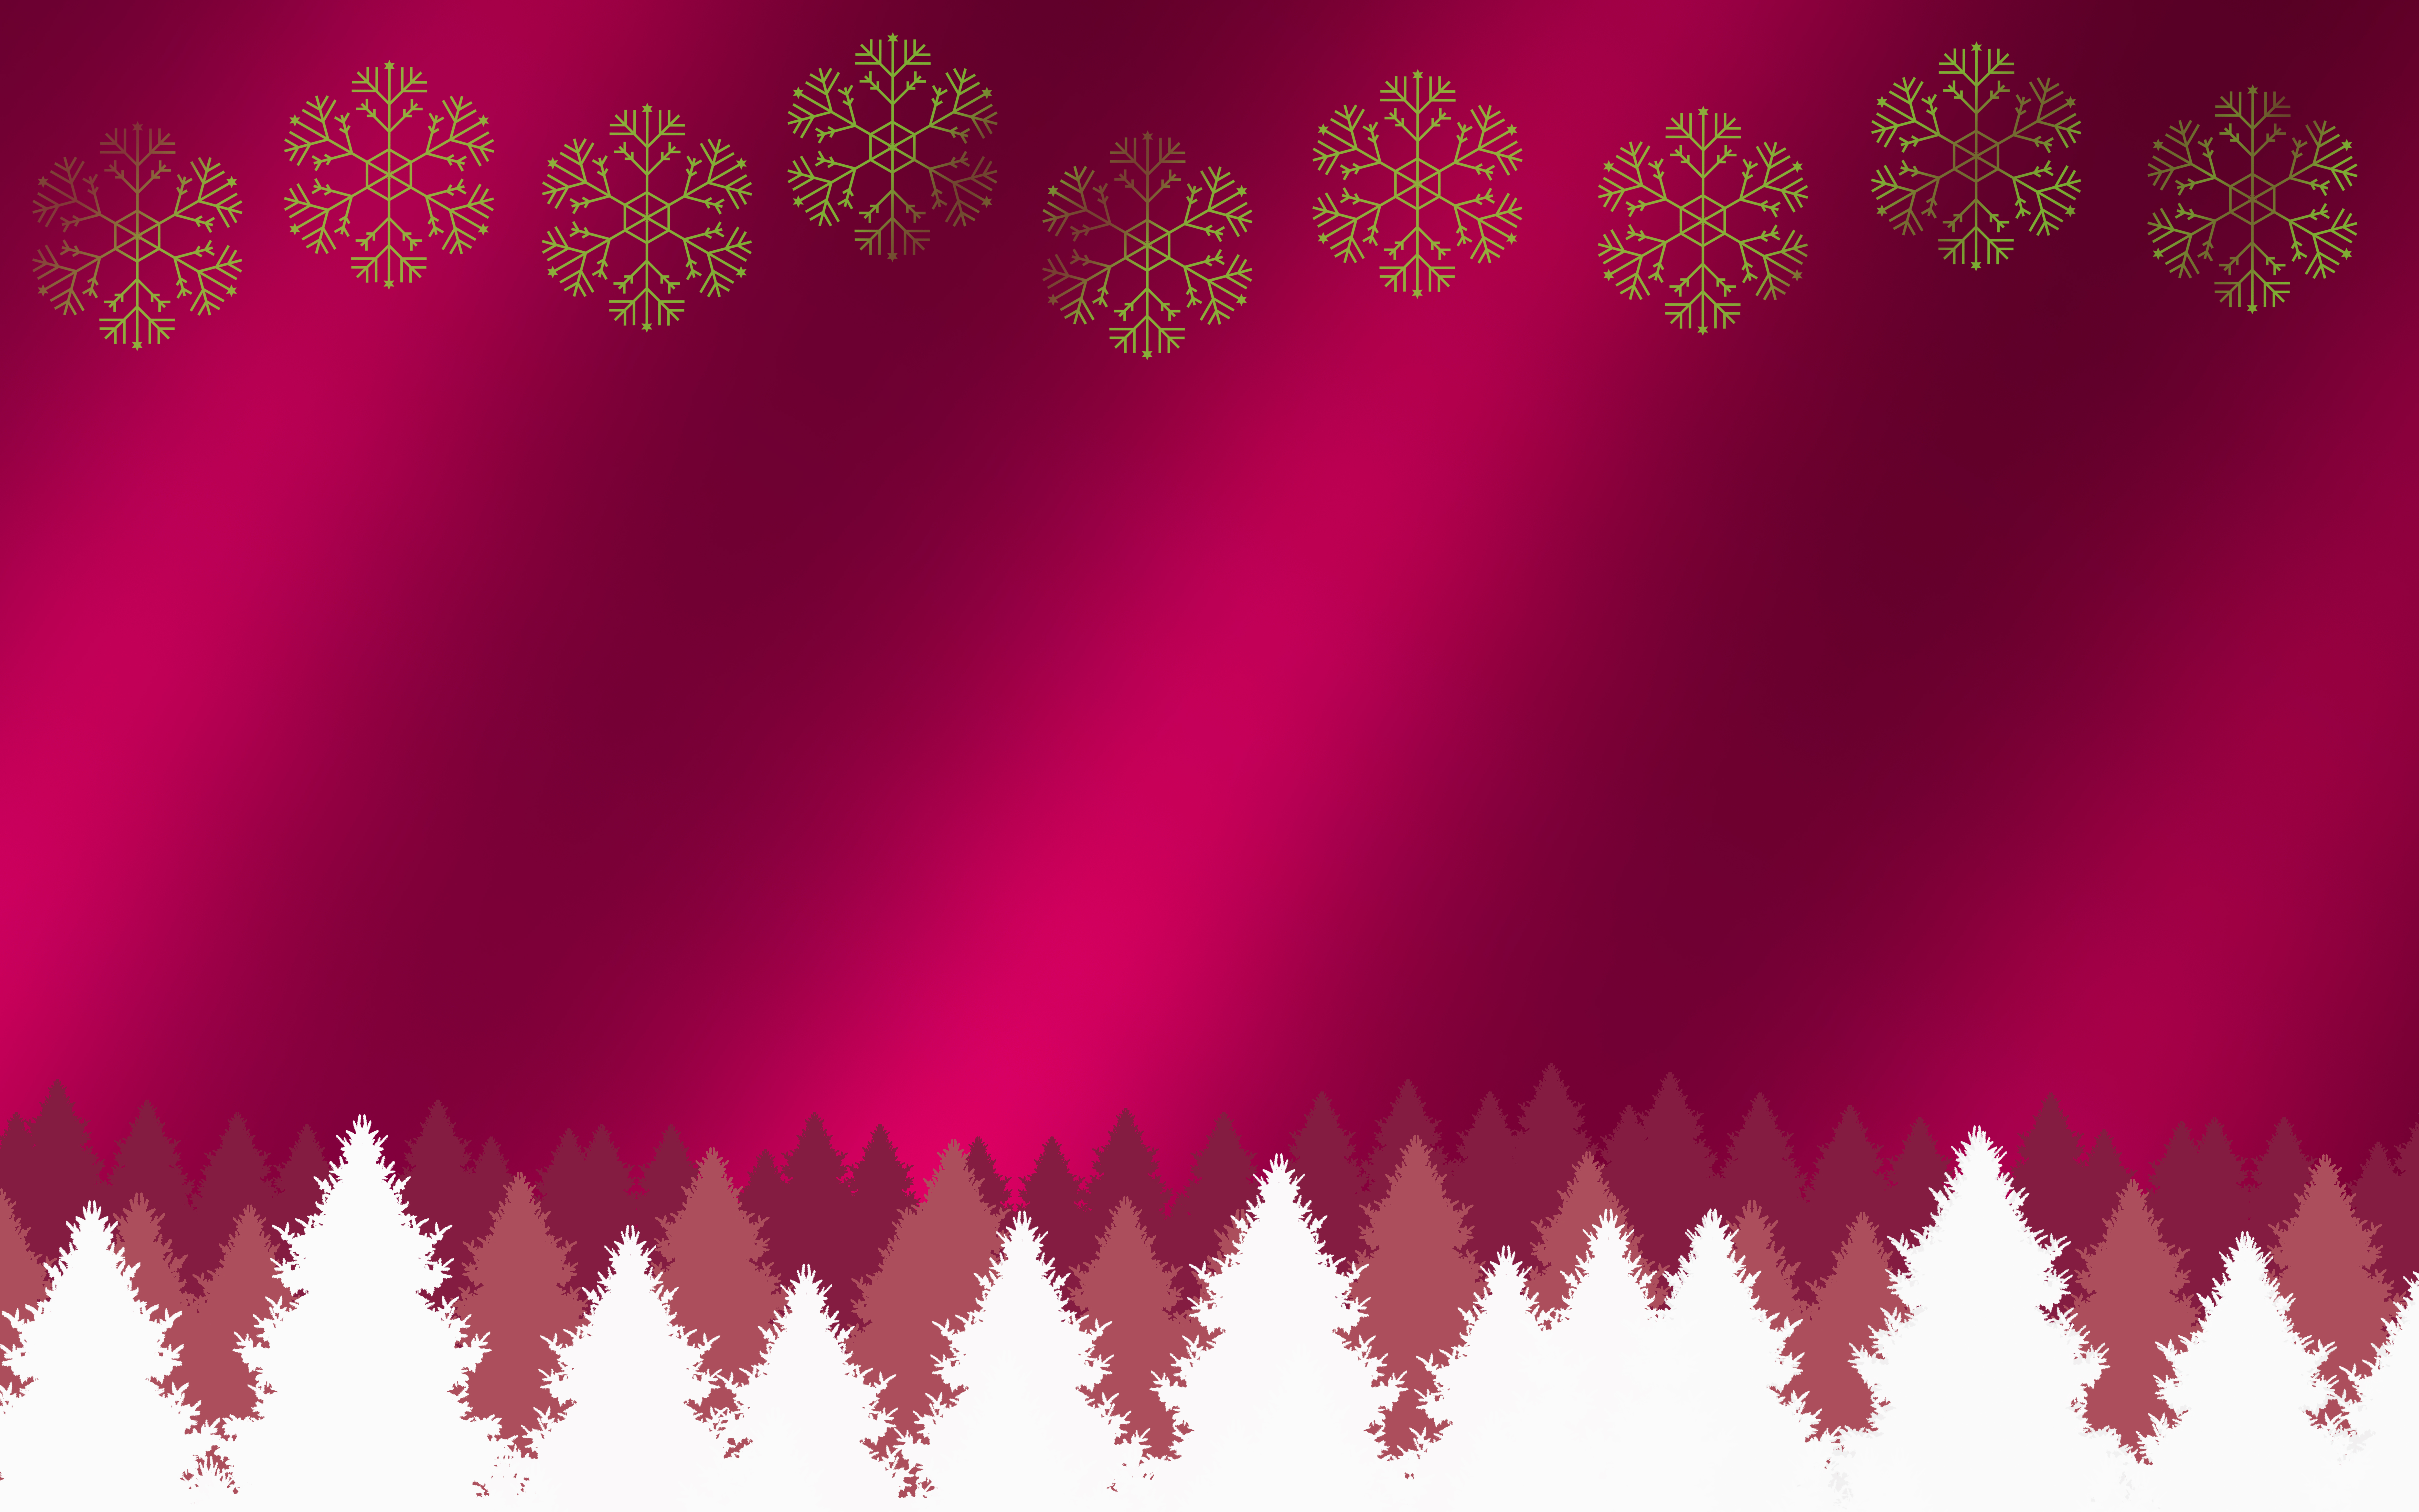 Horizontal white trees and falling snow on cherry red light gradient border background gold flakes